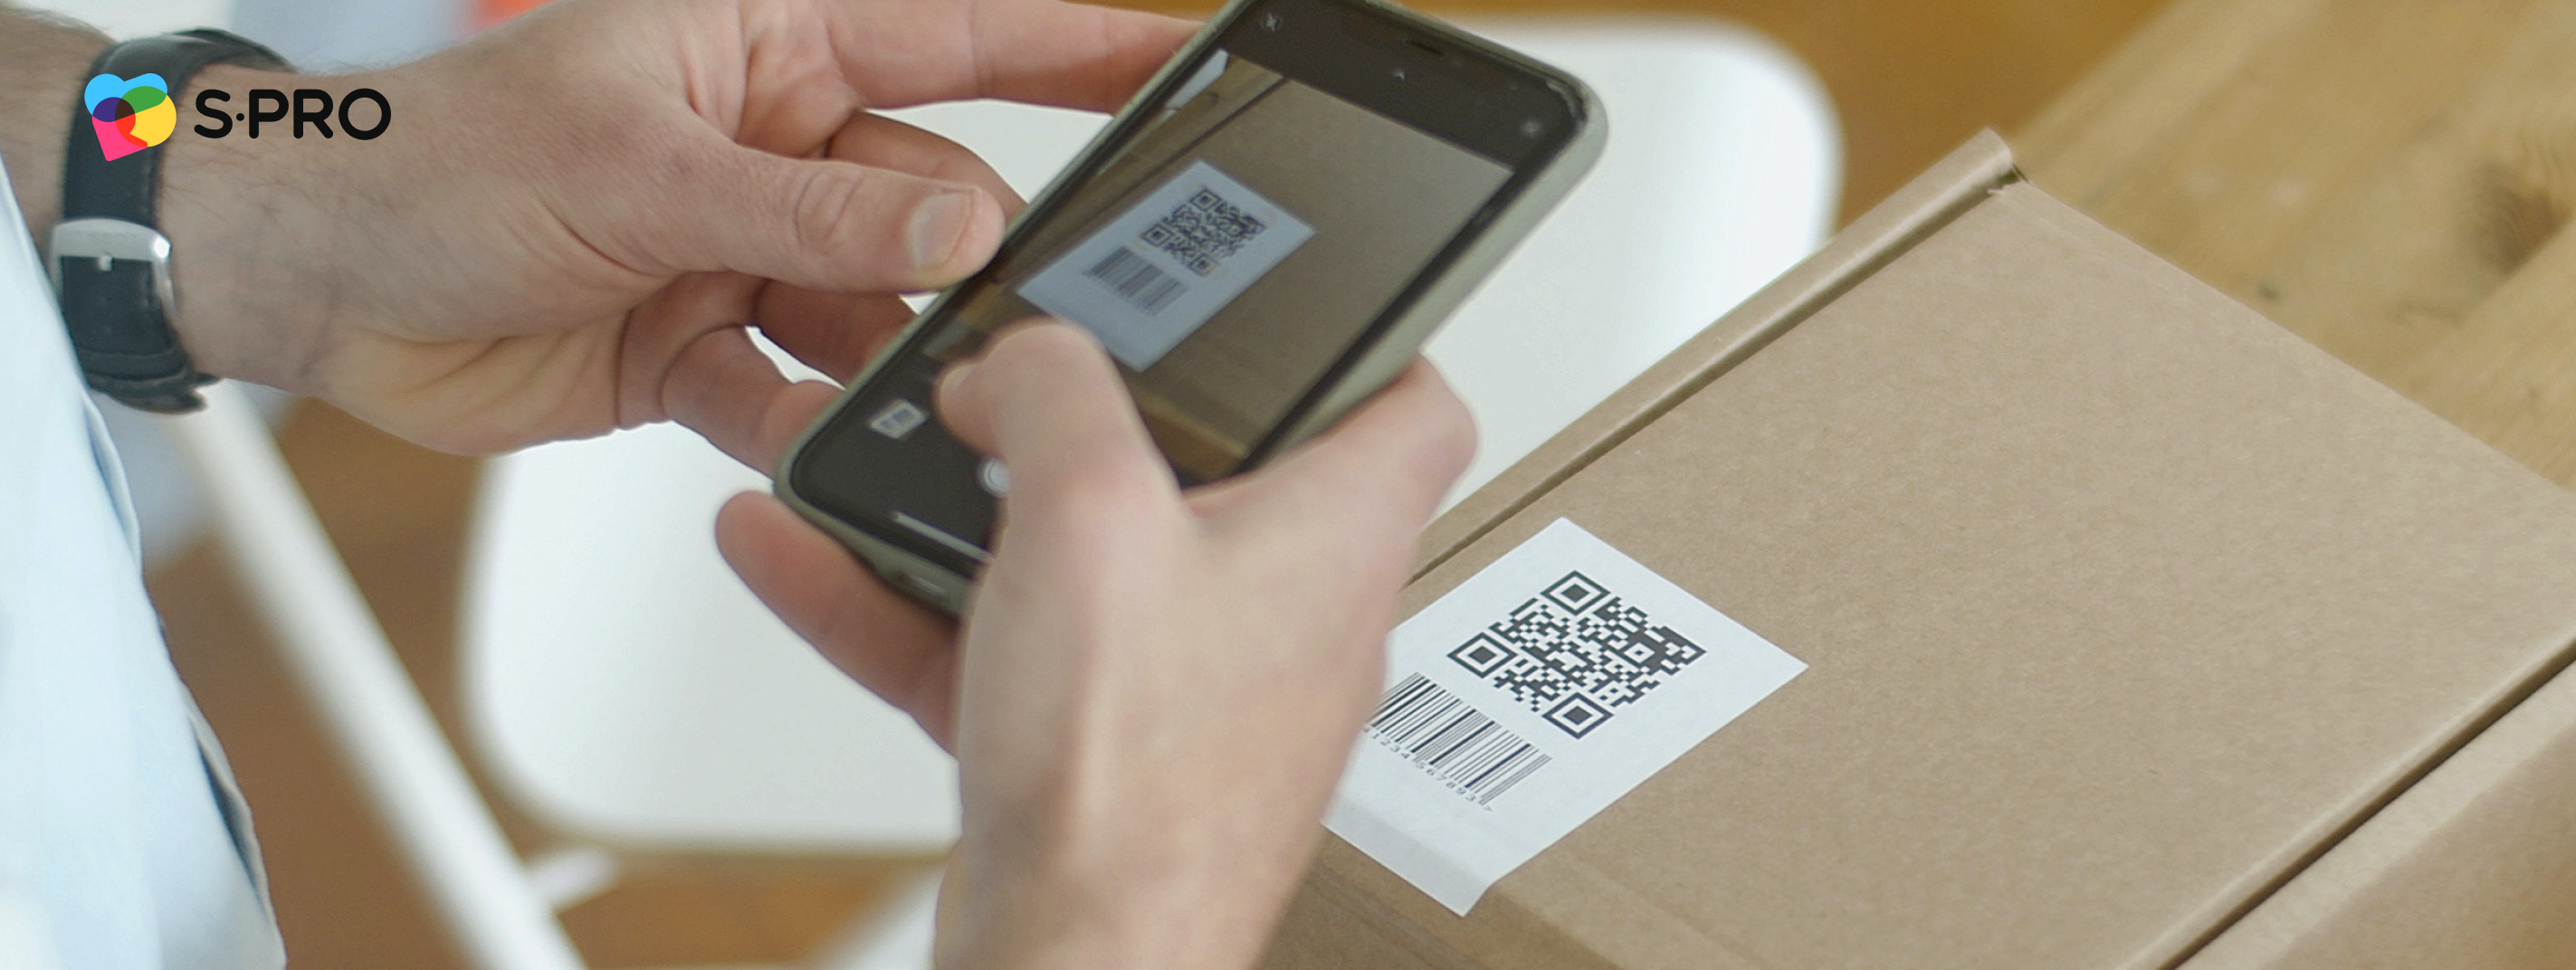 The Next Step in Product Authentication - photo 2